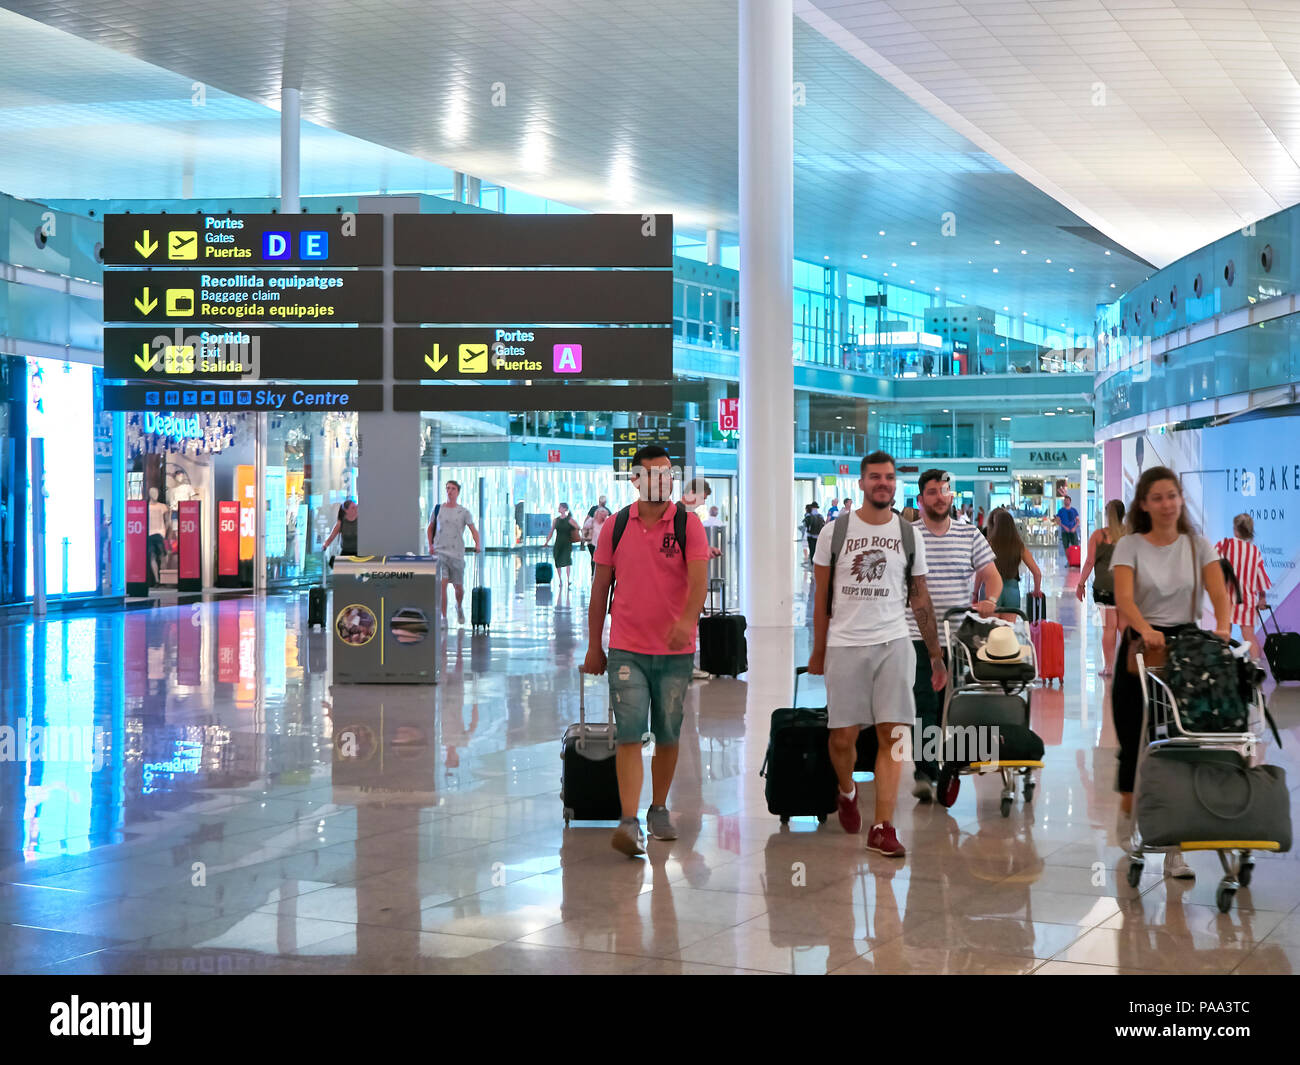 Barcelona, Spain - June 28, 2018. Passengers in transit in a Terminal of Barcelona international airport with a Dutyfree stores in background. Barcelo Stock Photo